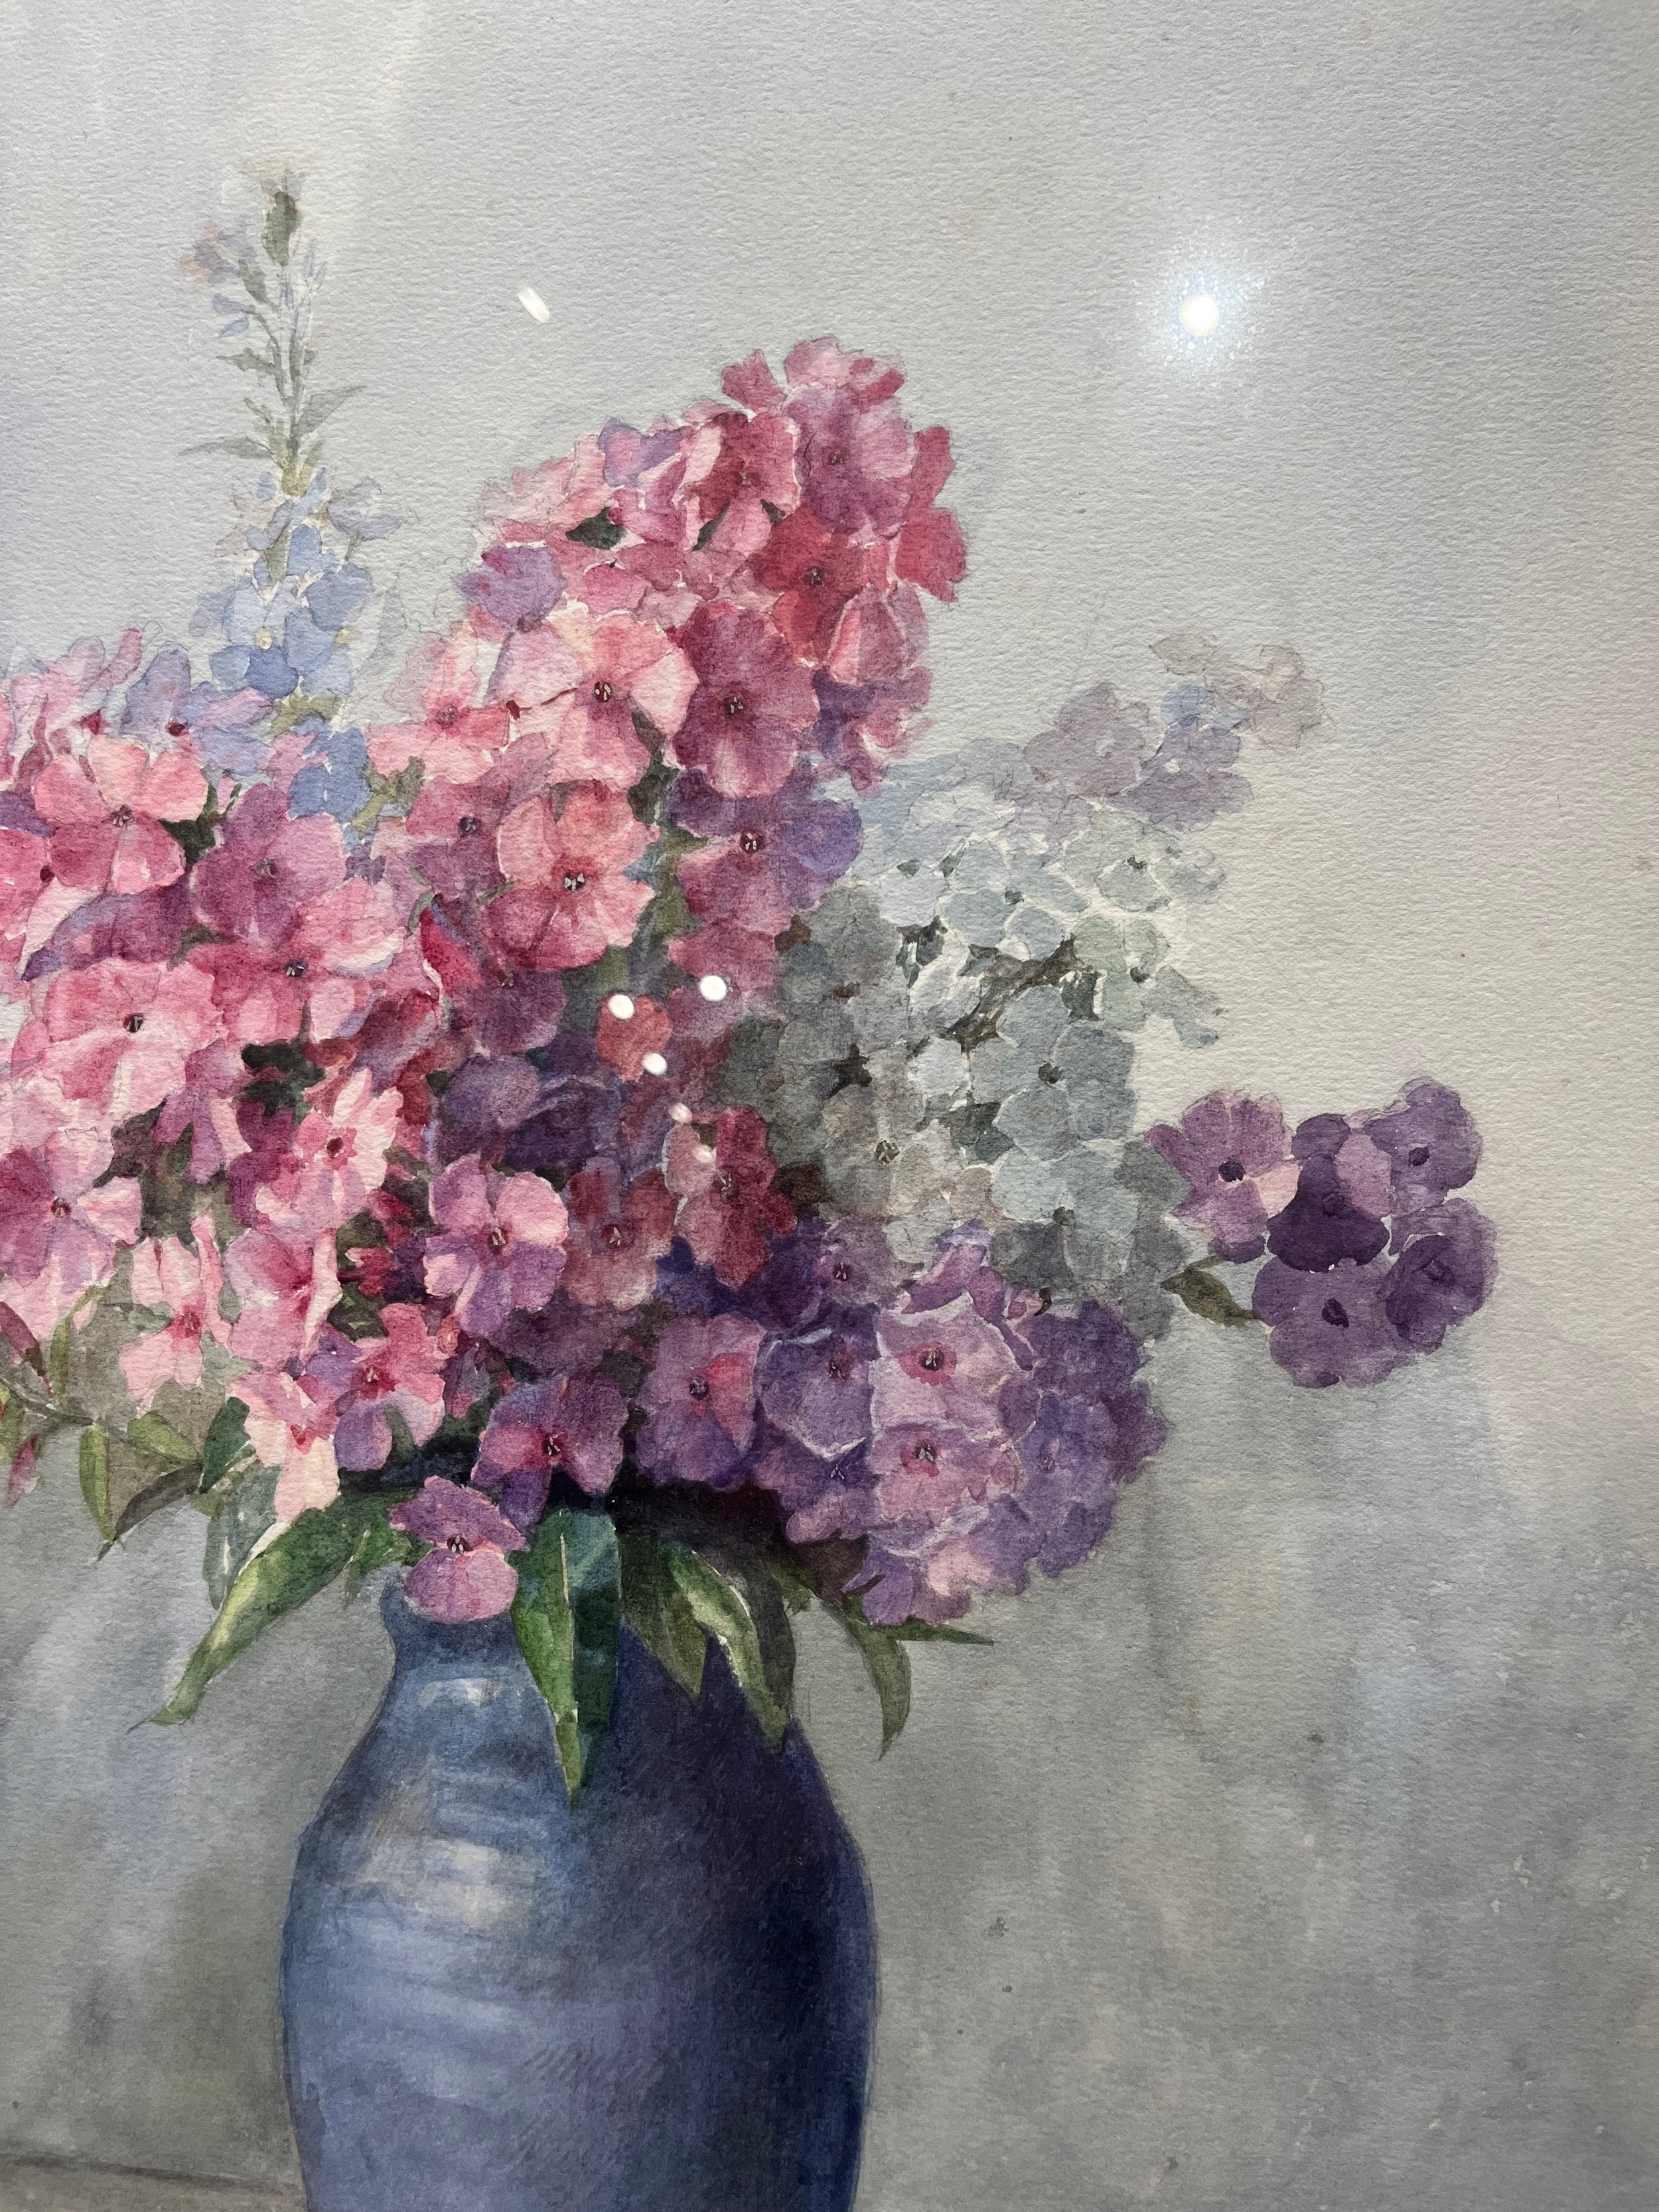 Artwork by Elizabeth King, Phlox, Made of Watercolour on paper